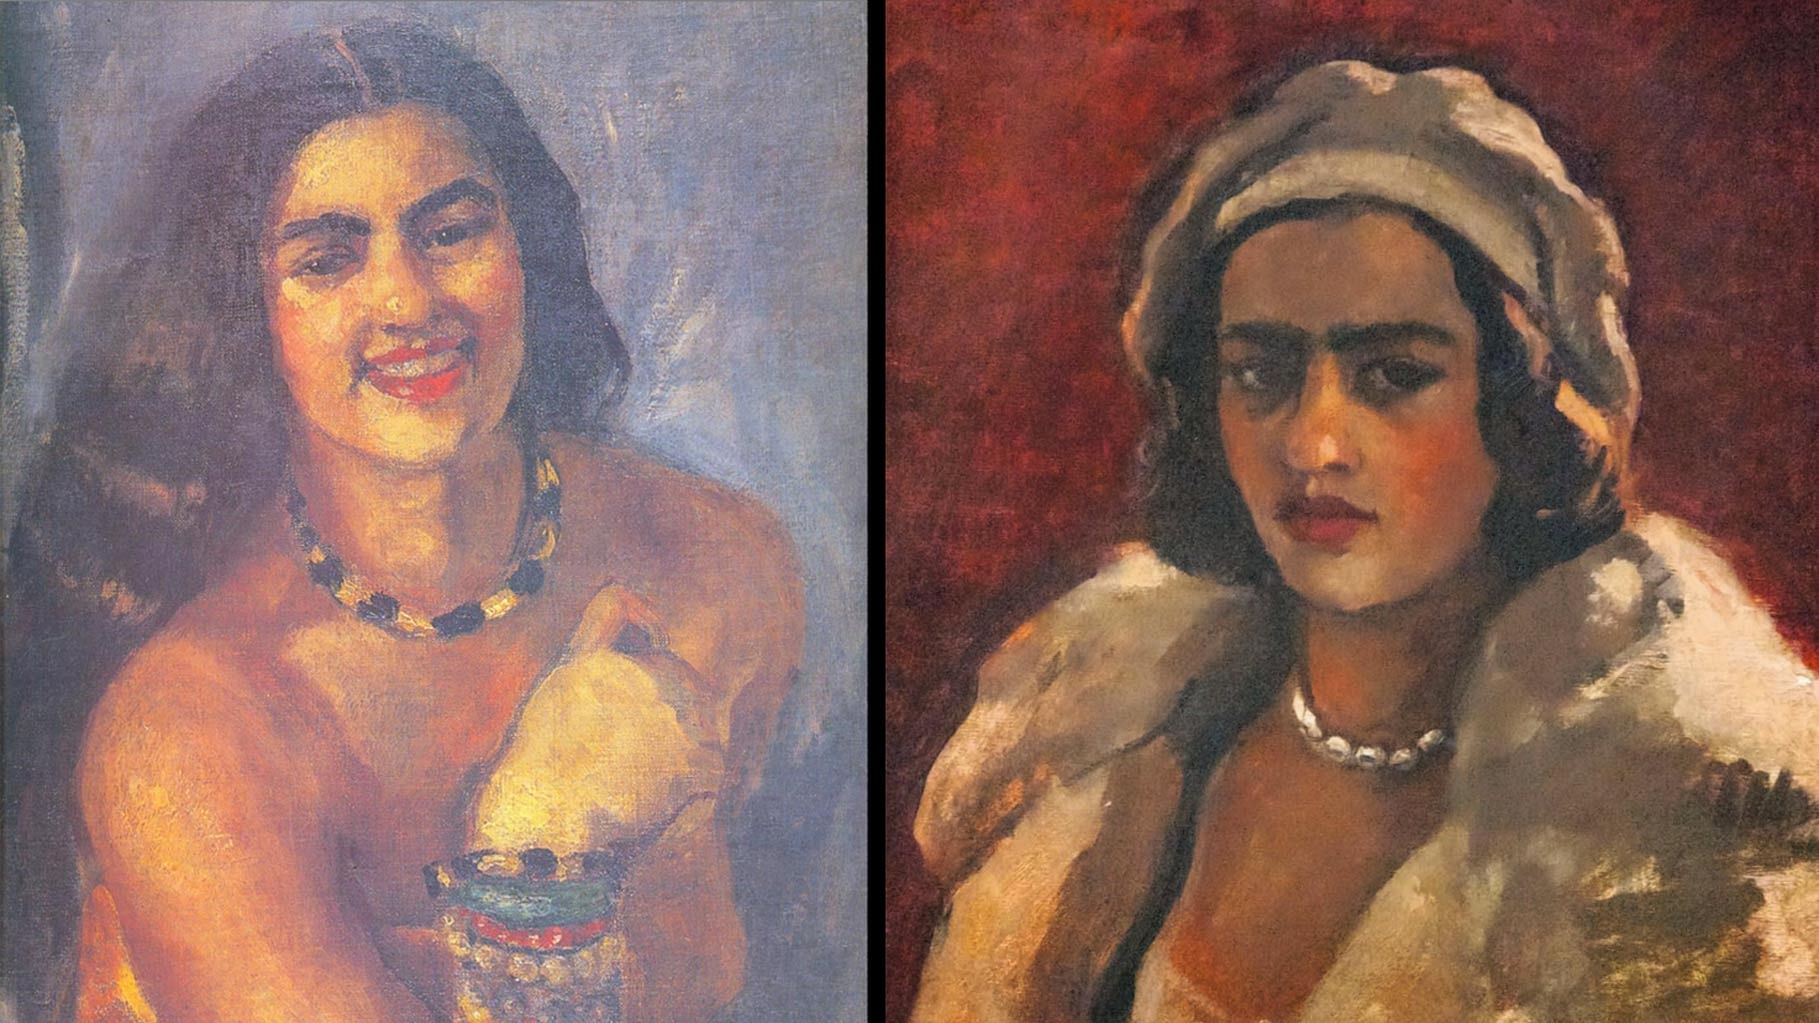 Amrita Sher-Gil indulged in self-portraits from early 1930s. (Photo Courtesy: <a href="http://ngmaindia.gov.in/sh-amrita.asp#">NGMA website</a>)